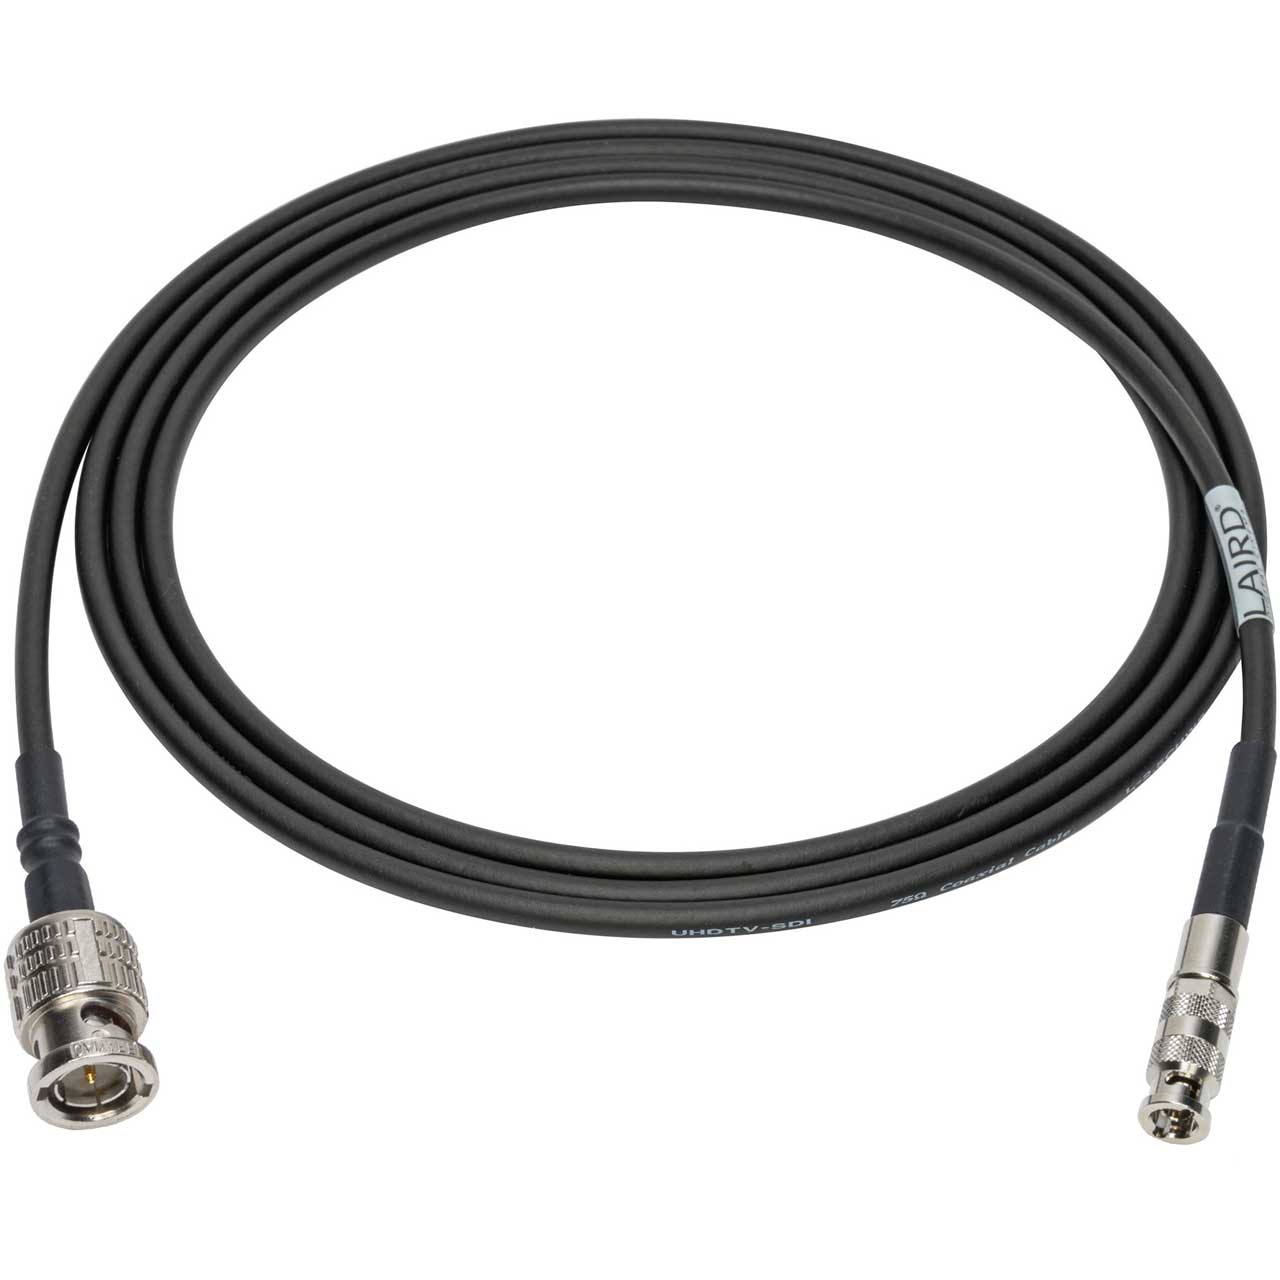 Laird L25CHWS-BMB-015 Canare L-2.5CHWS Ultra Slim Cable with Canare BNC and Micro-BNC 75Ohm Connectors- 15 Foot L25CHWS-BMB-015